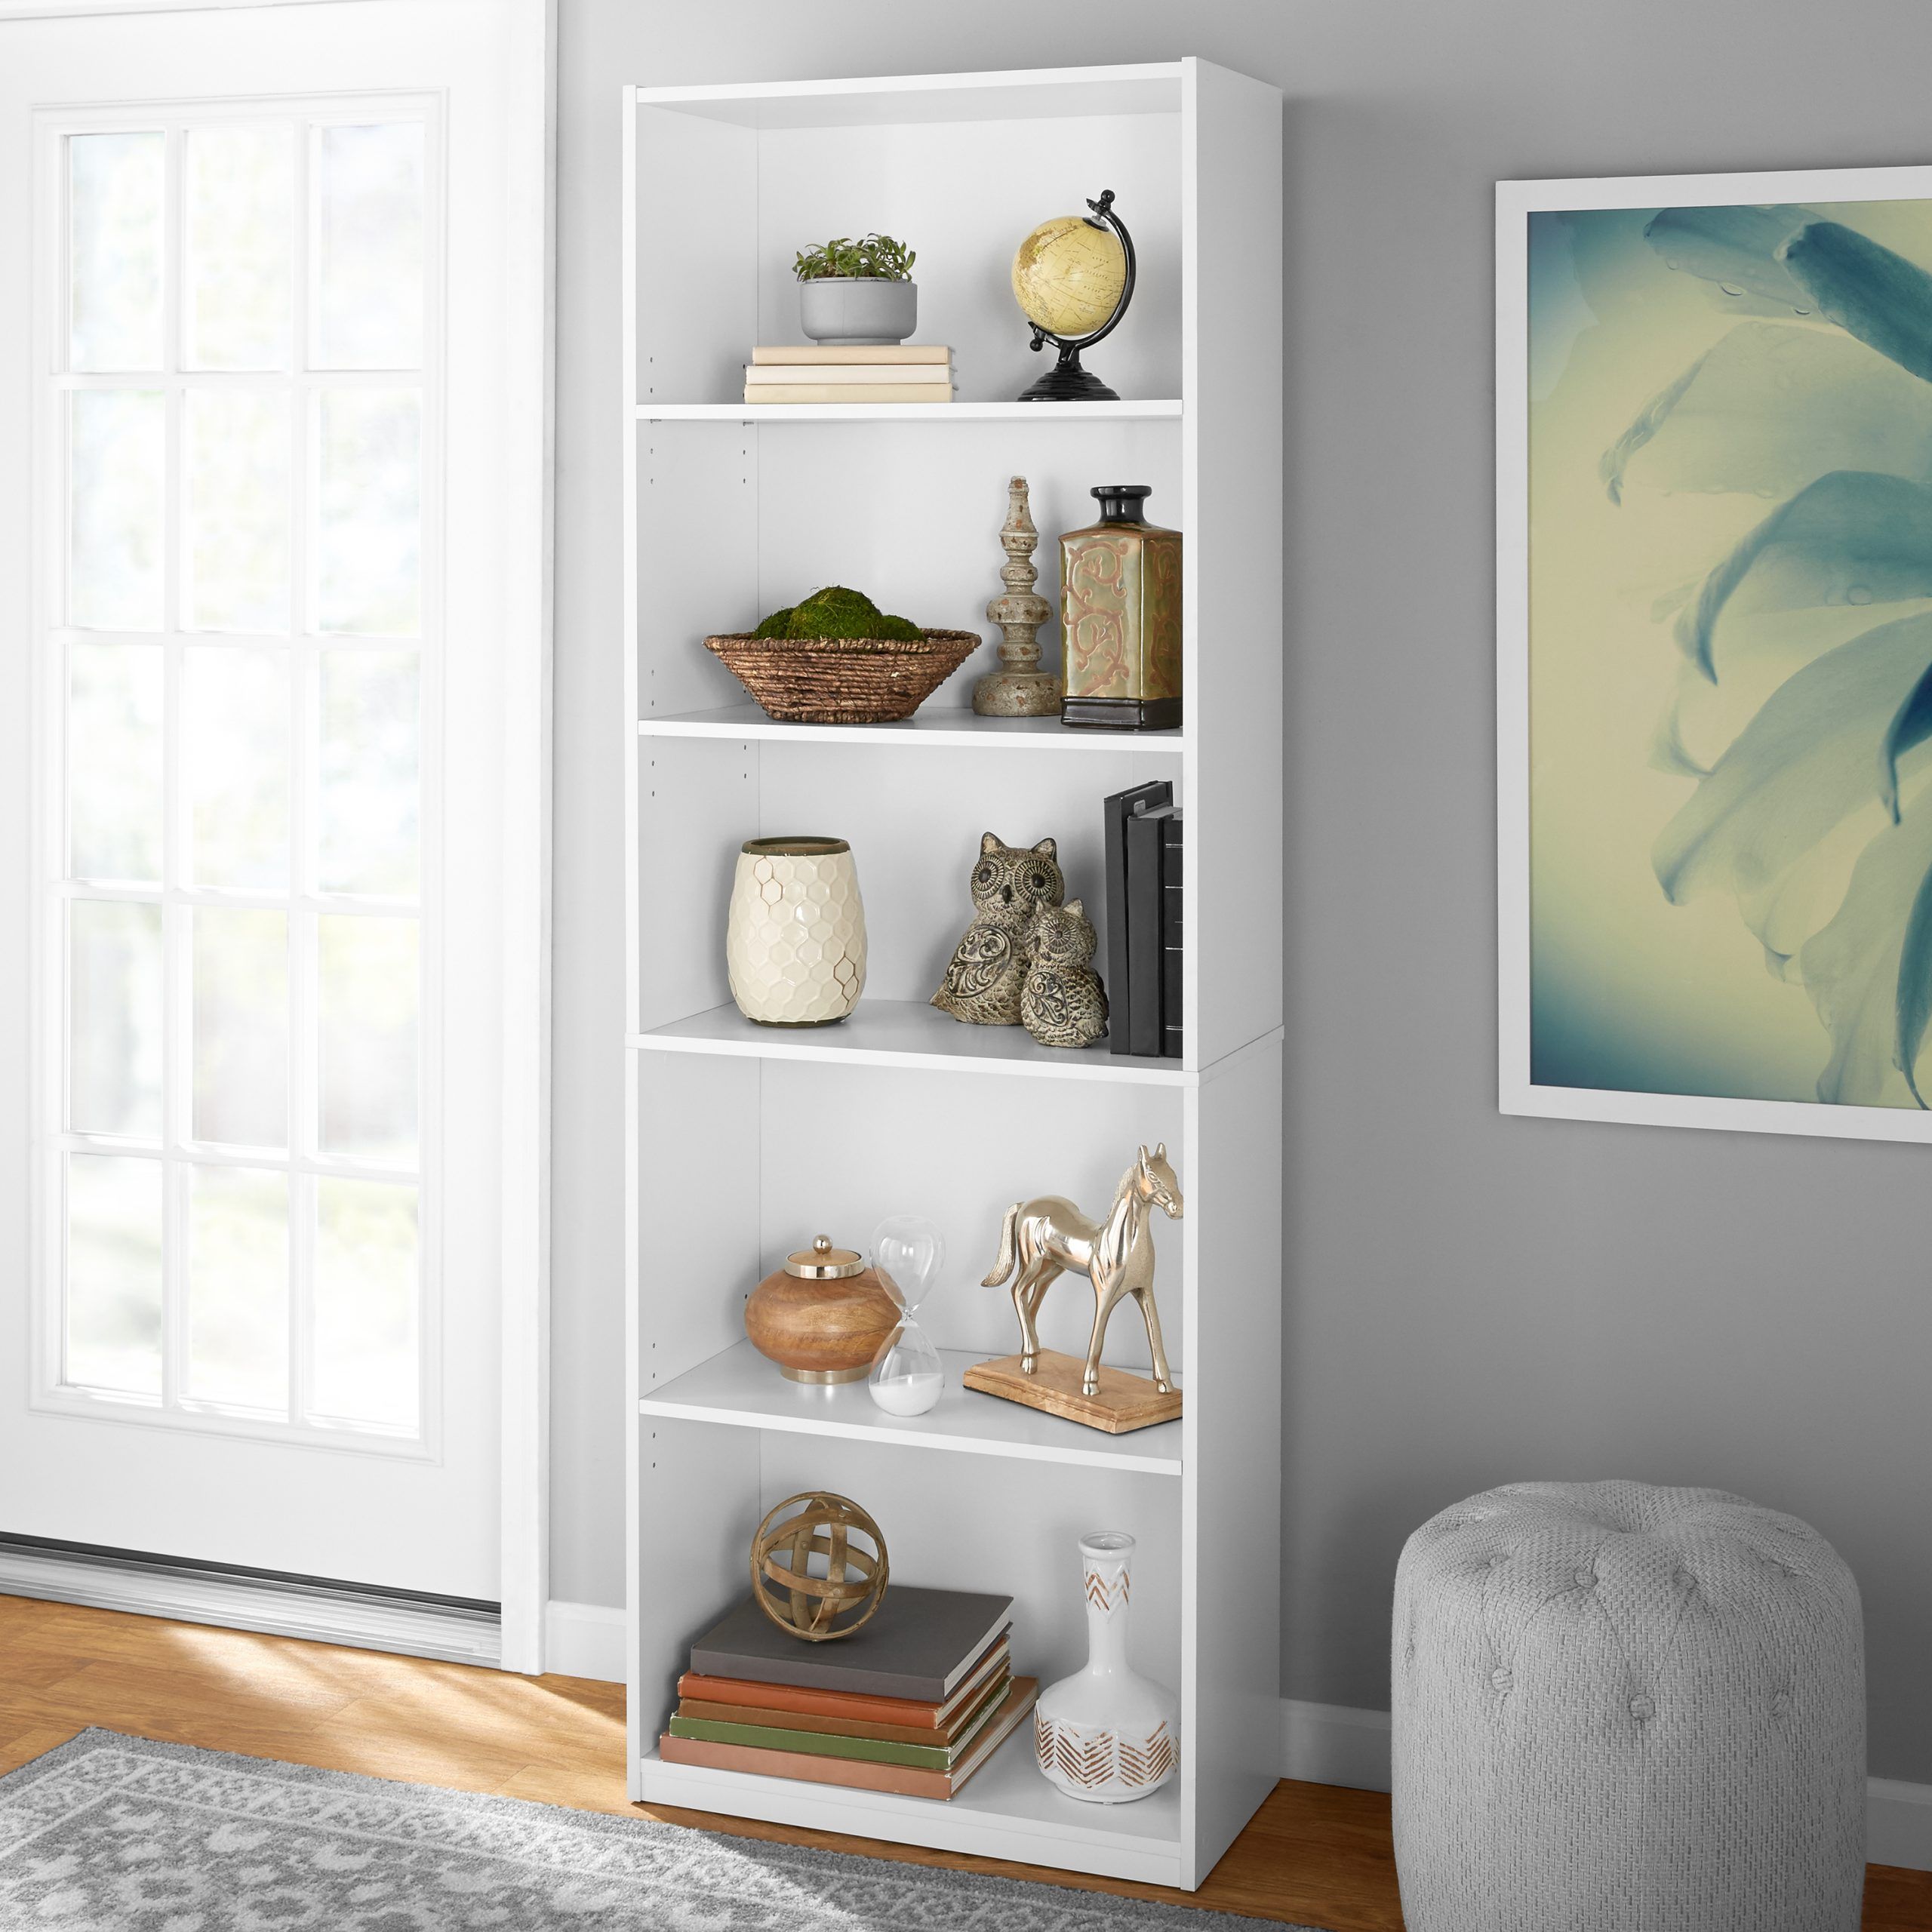 Mainstays 5 Shelf Bookcase With Adjustable Shelves, White – Walmart Regarding Bookcases With Five Shelves (View 3 of 15)